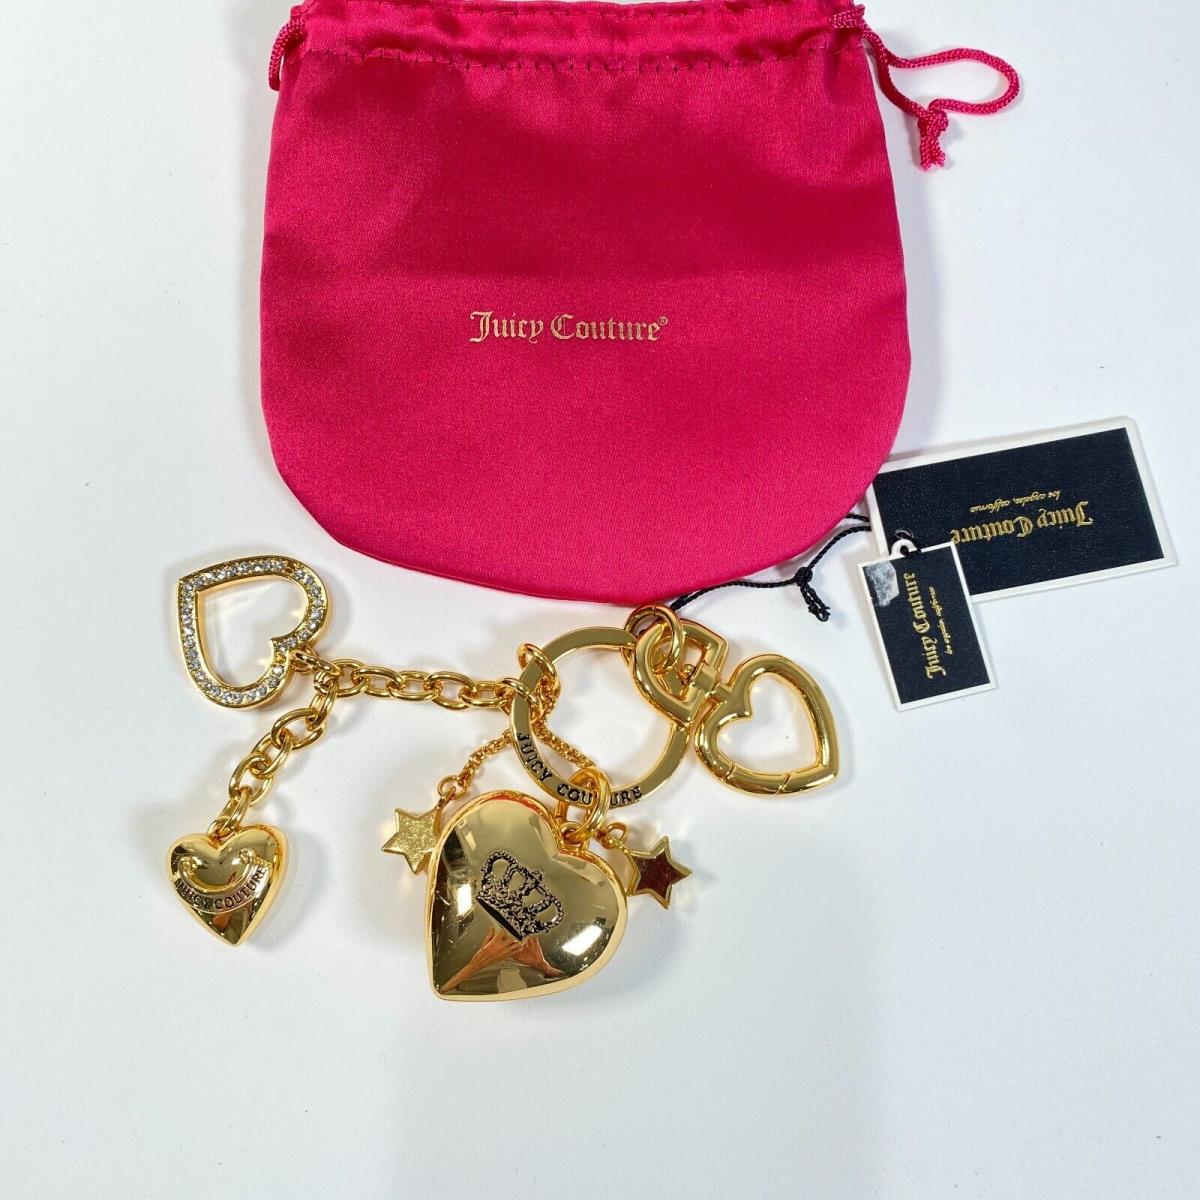 Juicy Couture Key Fob Bag Charm Hearts and Stars Gold Crystals Pink Bag